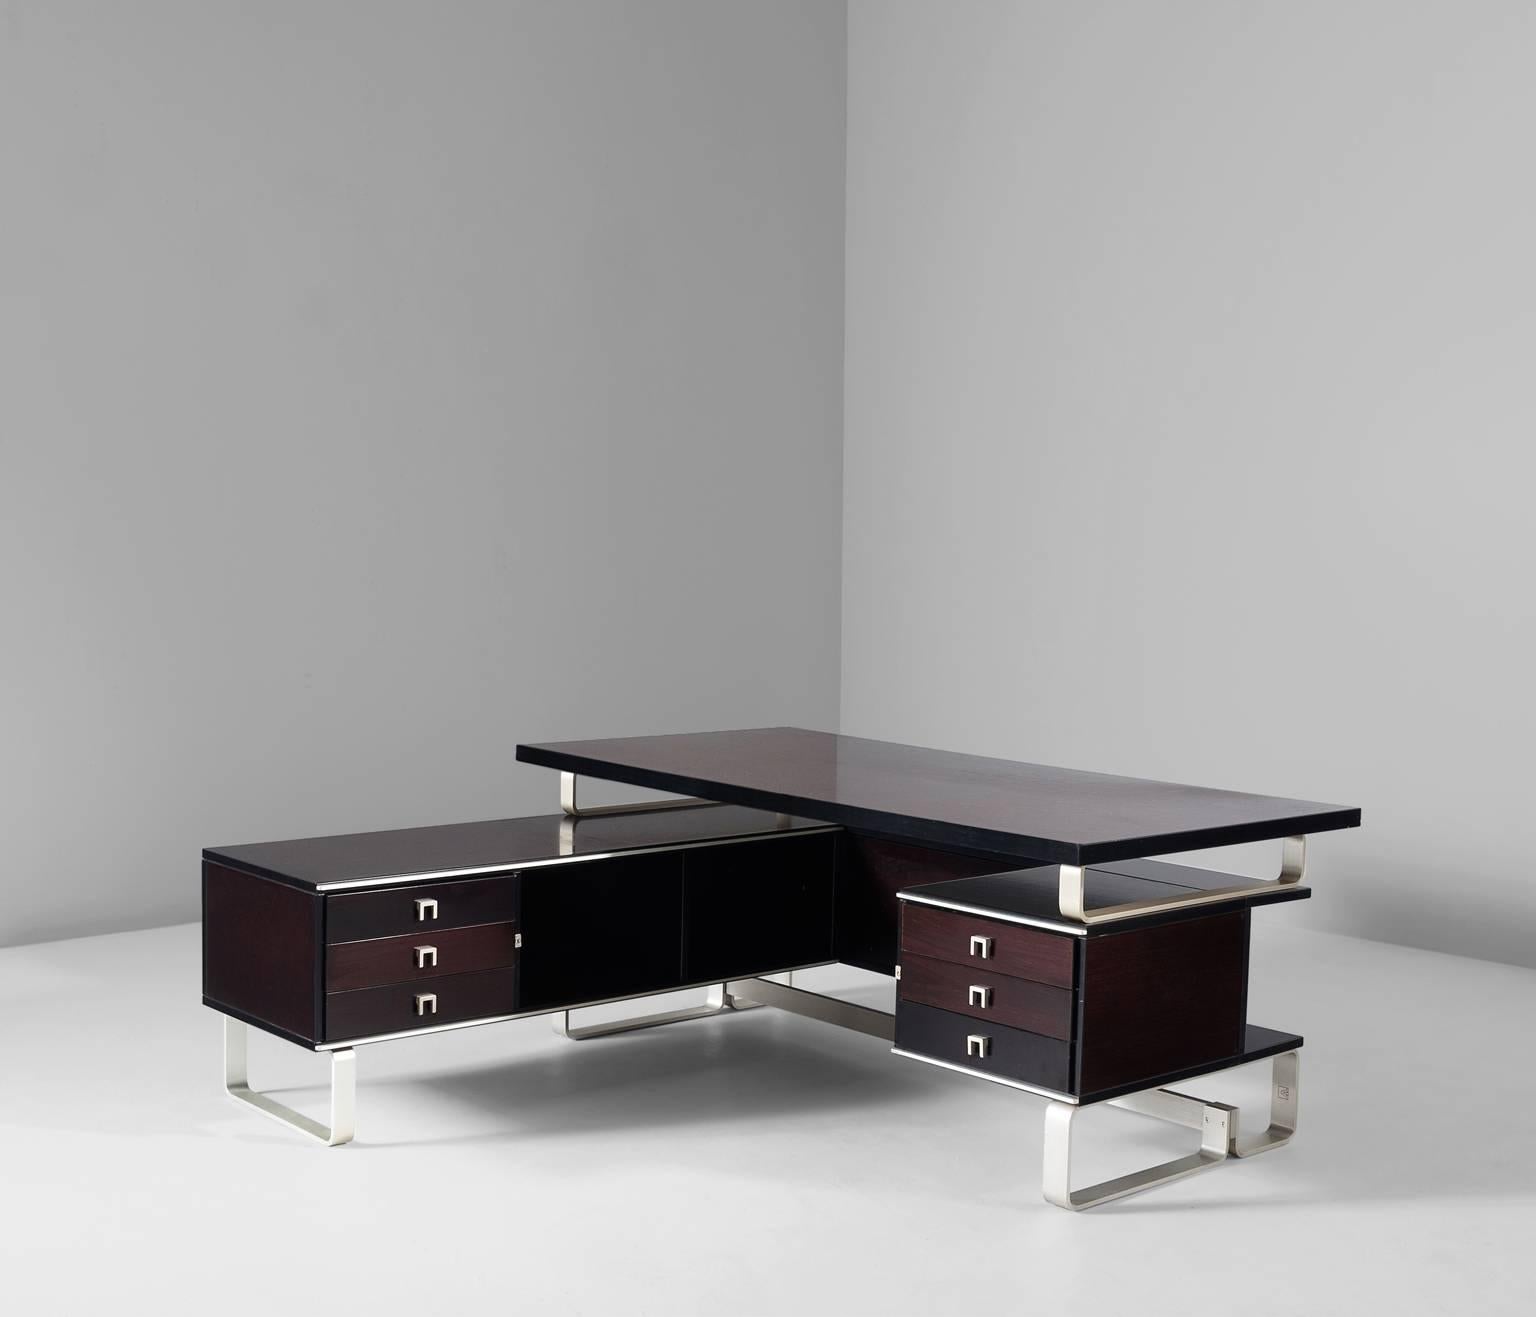 Desk with retour, in mahogany and aluminium, for Abbondinterni, Italy 1960s.

Large desk and return. Frame from aluminium strips. Both sides of the desks are equipped with three drawers. Rectangular table top. The mahogany is stained in a dark